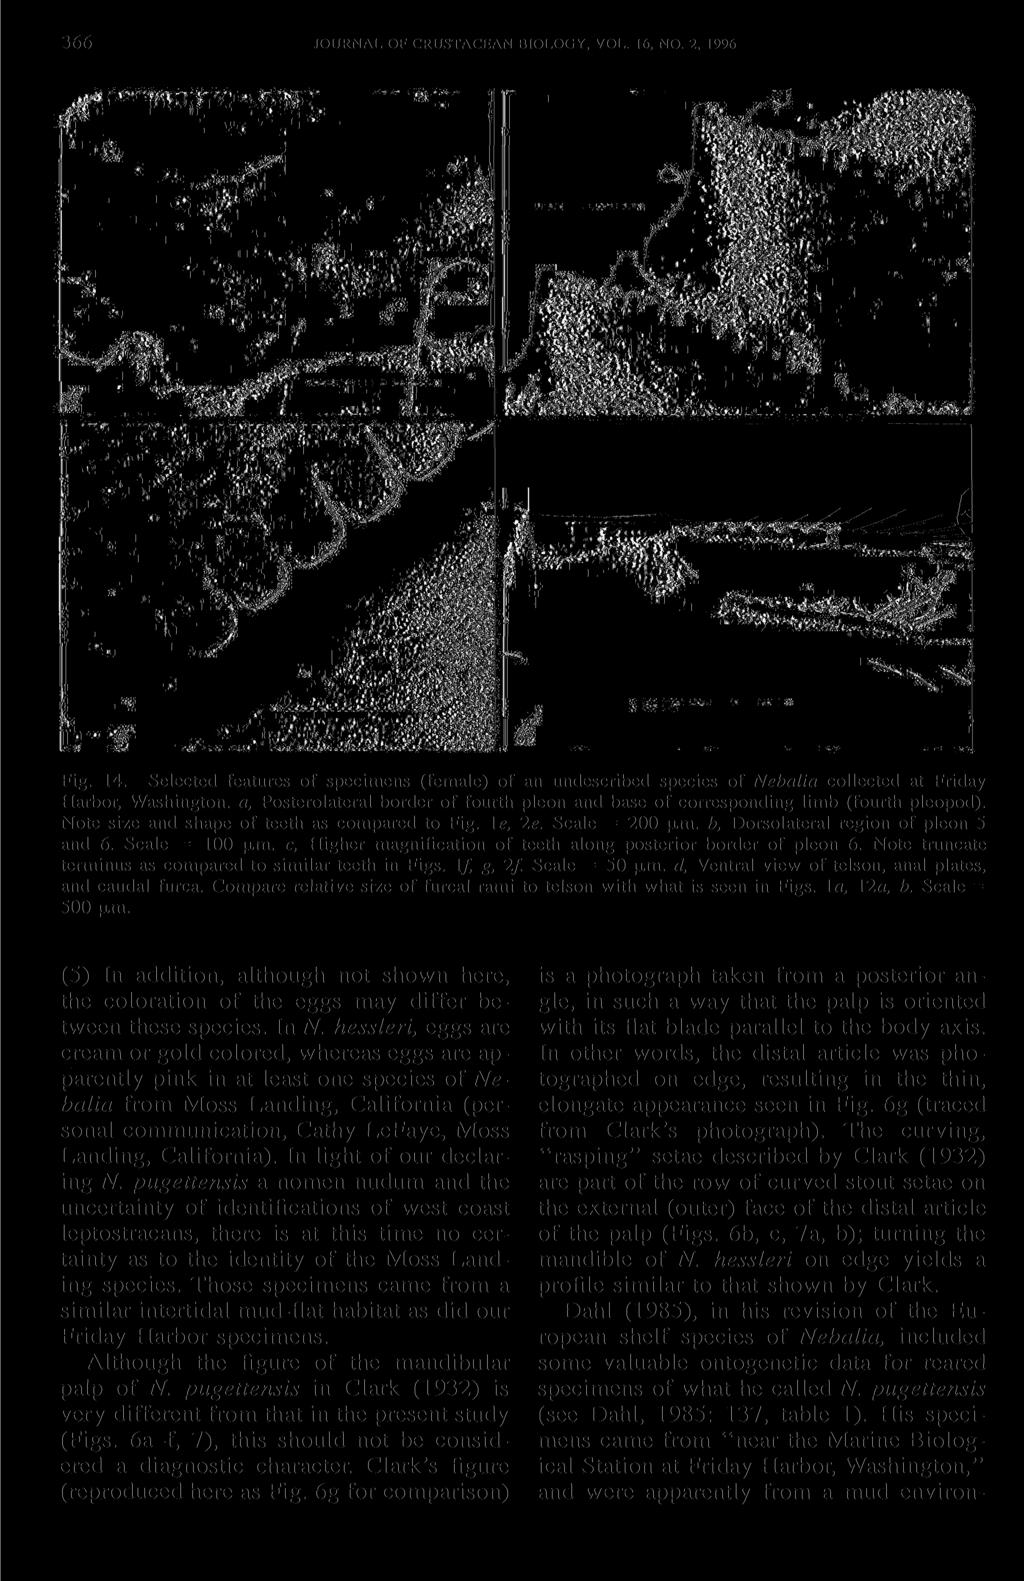 366 JOURNAL OF CRUSTACEAN BIOLOGY, VOL. 16, NO. 2, 1996 Fig. 14. Selected features of specimens (female) of an undescribed species of Nebalia collected at Friday Harbor, Washington, a.